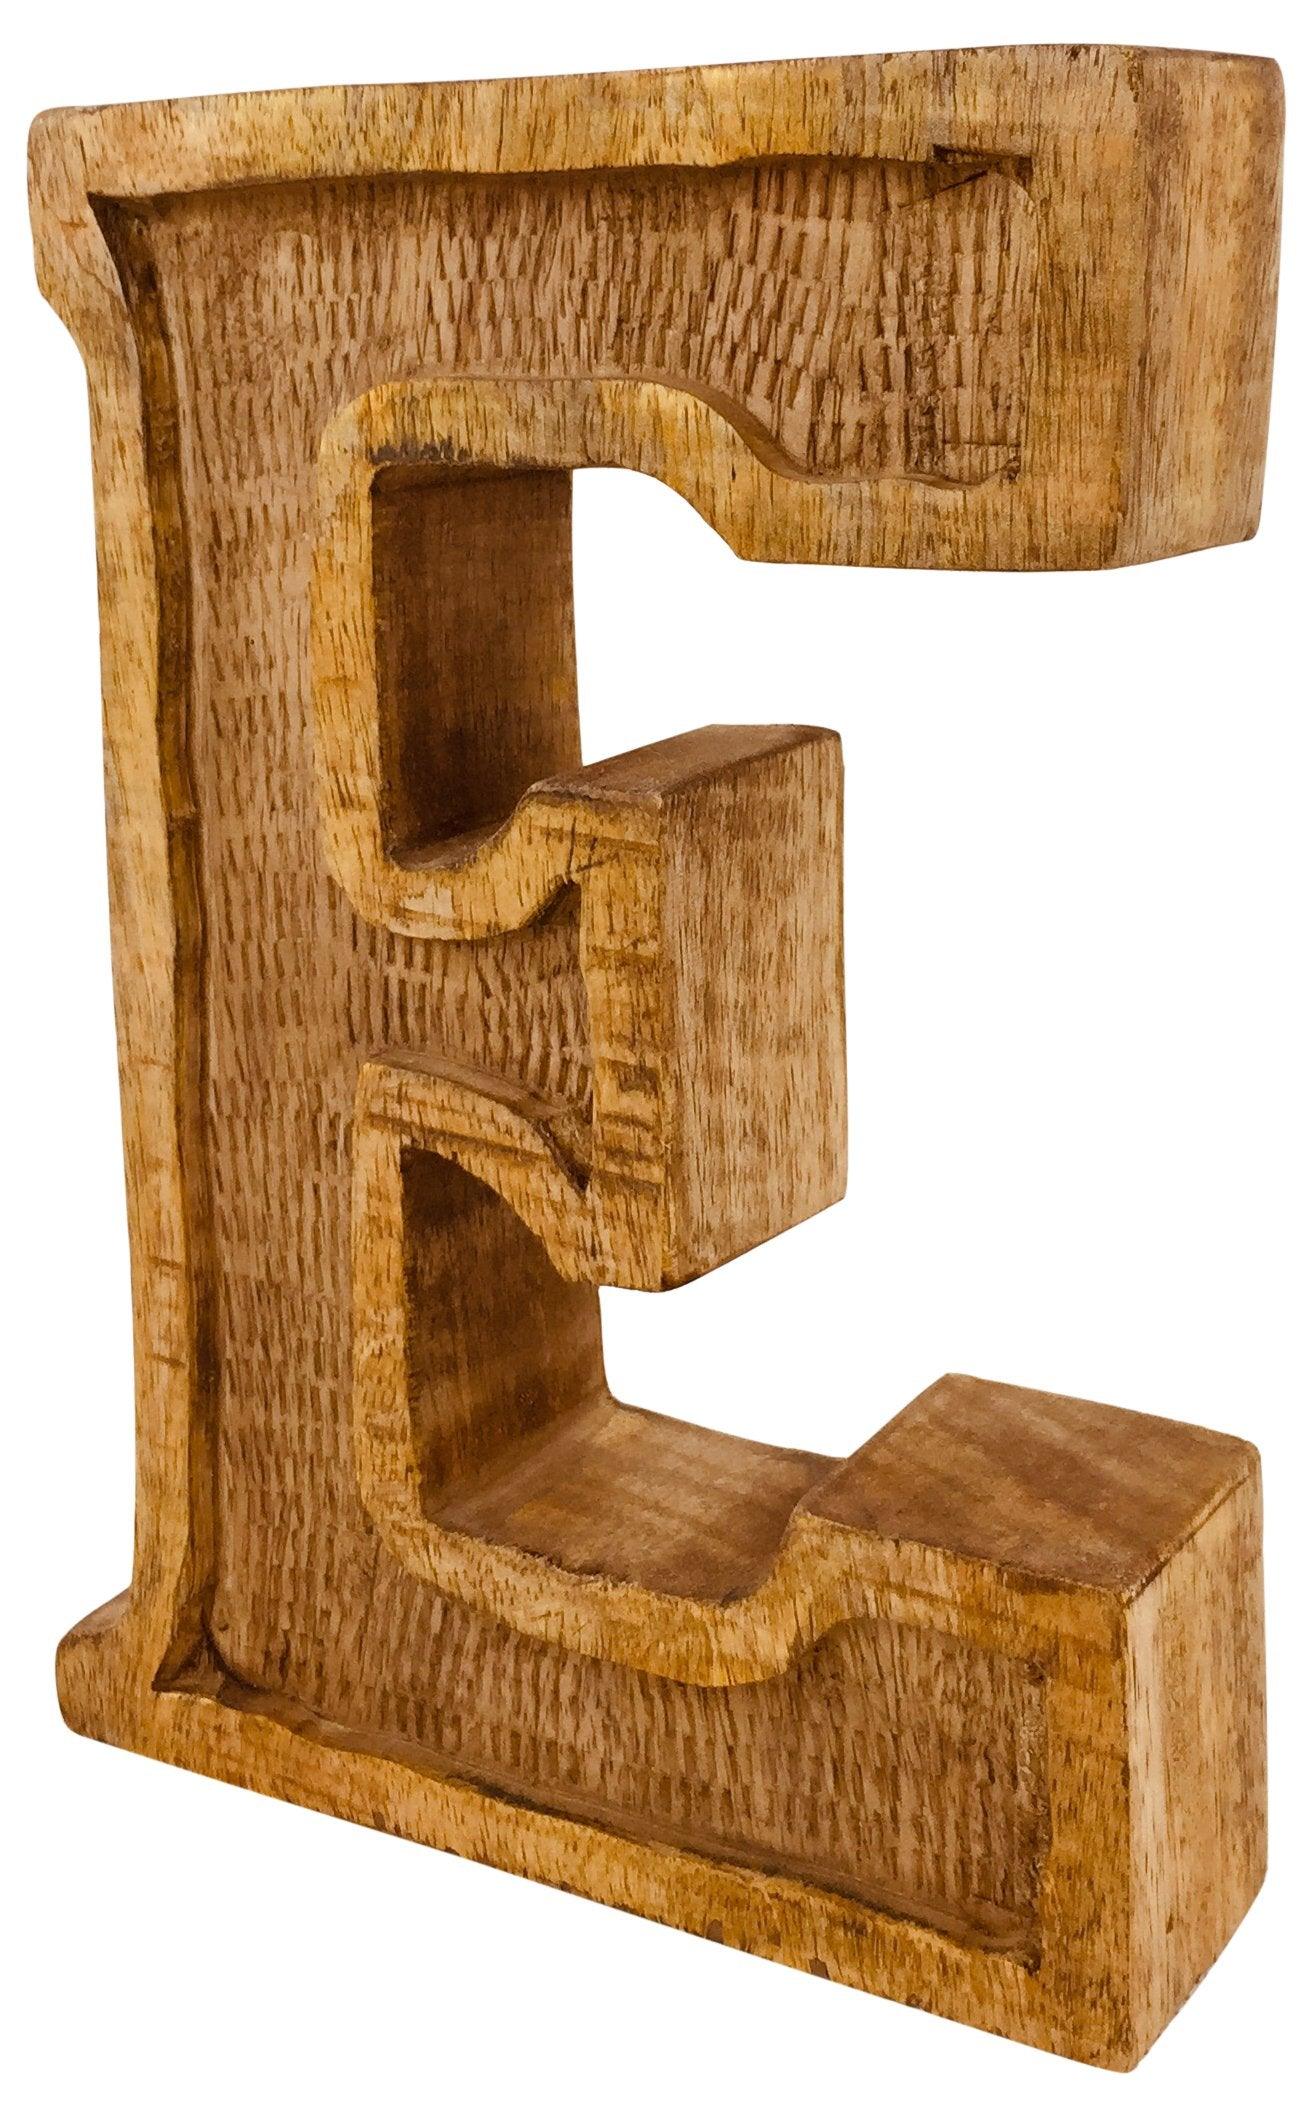 View Hand Carved Wooden Embossed Letter E information